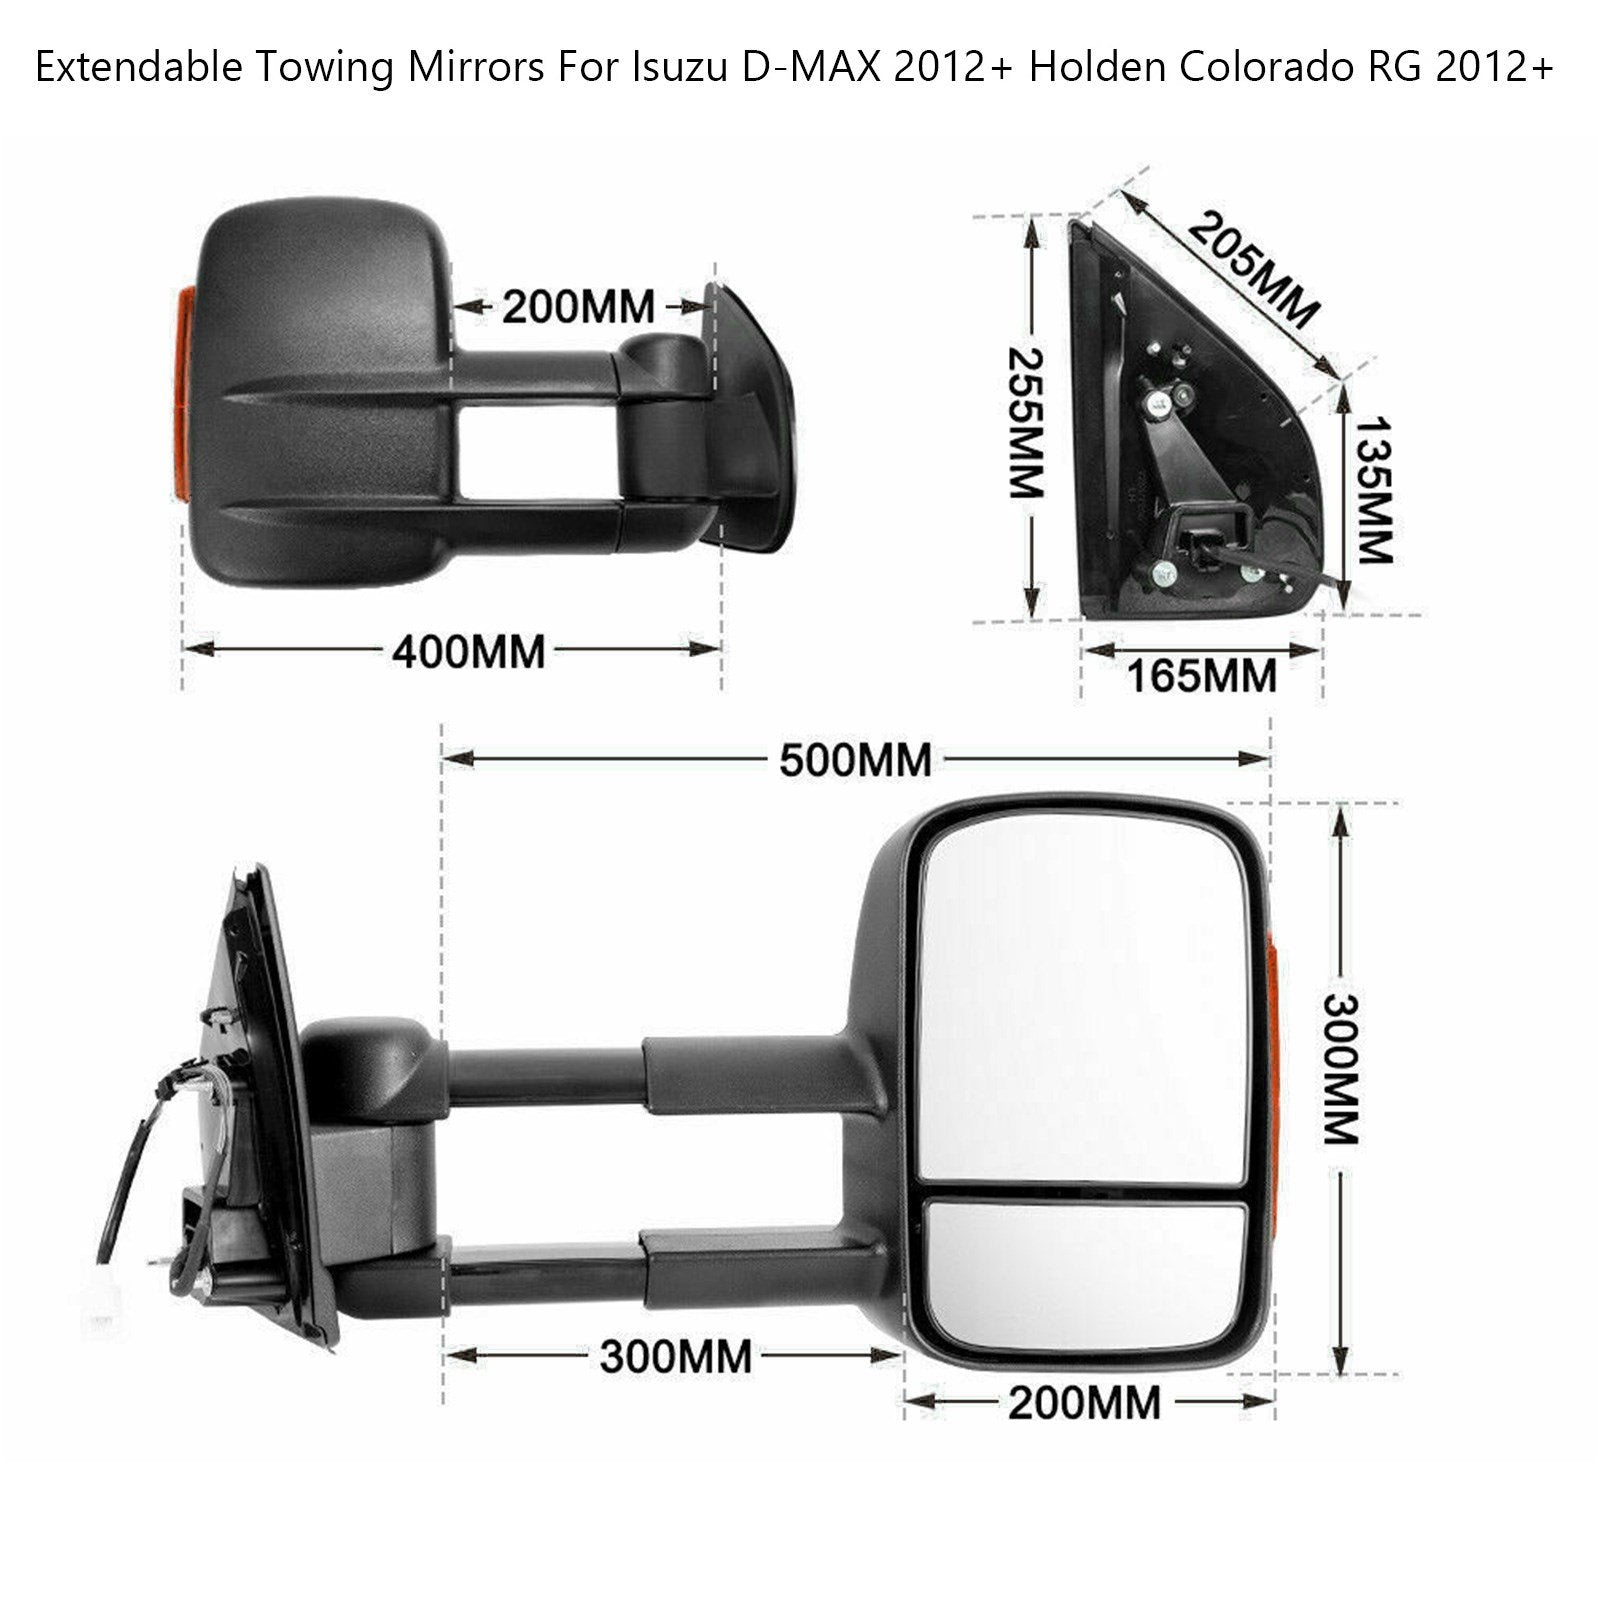 Extendable Towing Mirrors For Isuzu D-MAX 2012+ Holden Colorado RG 2012+ AU StockGeneric